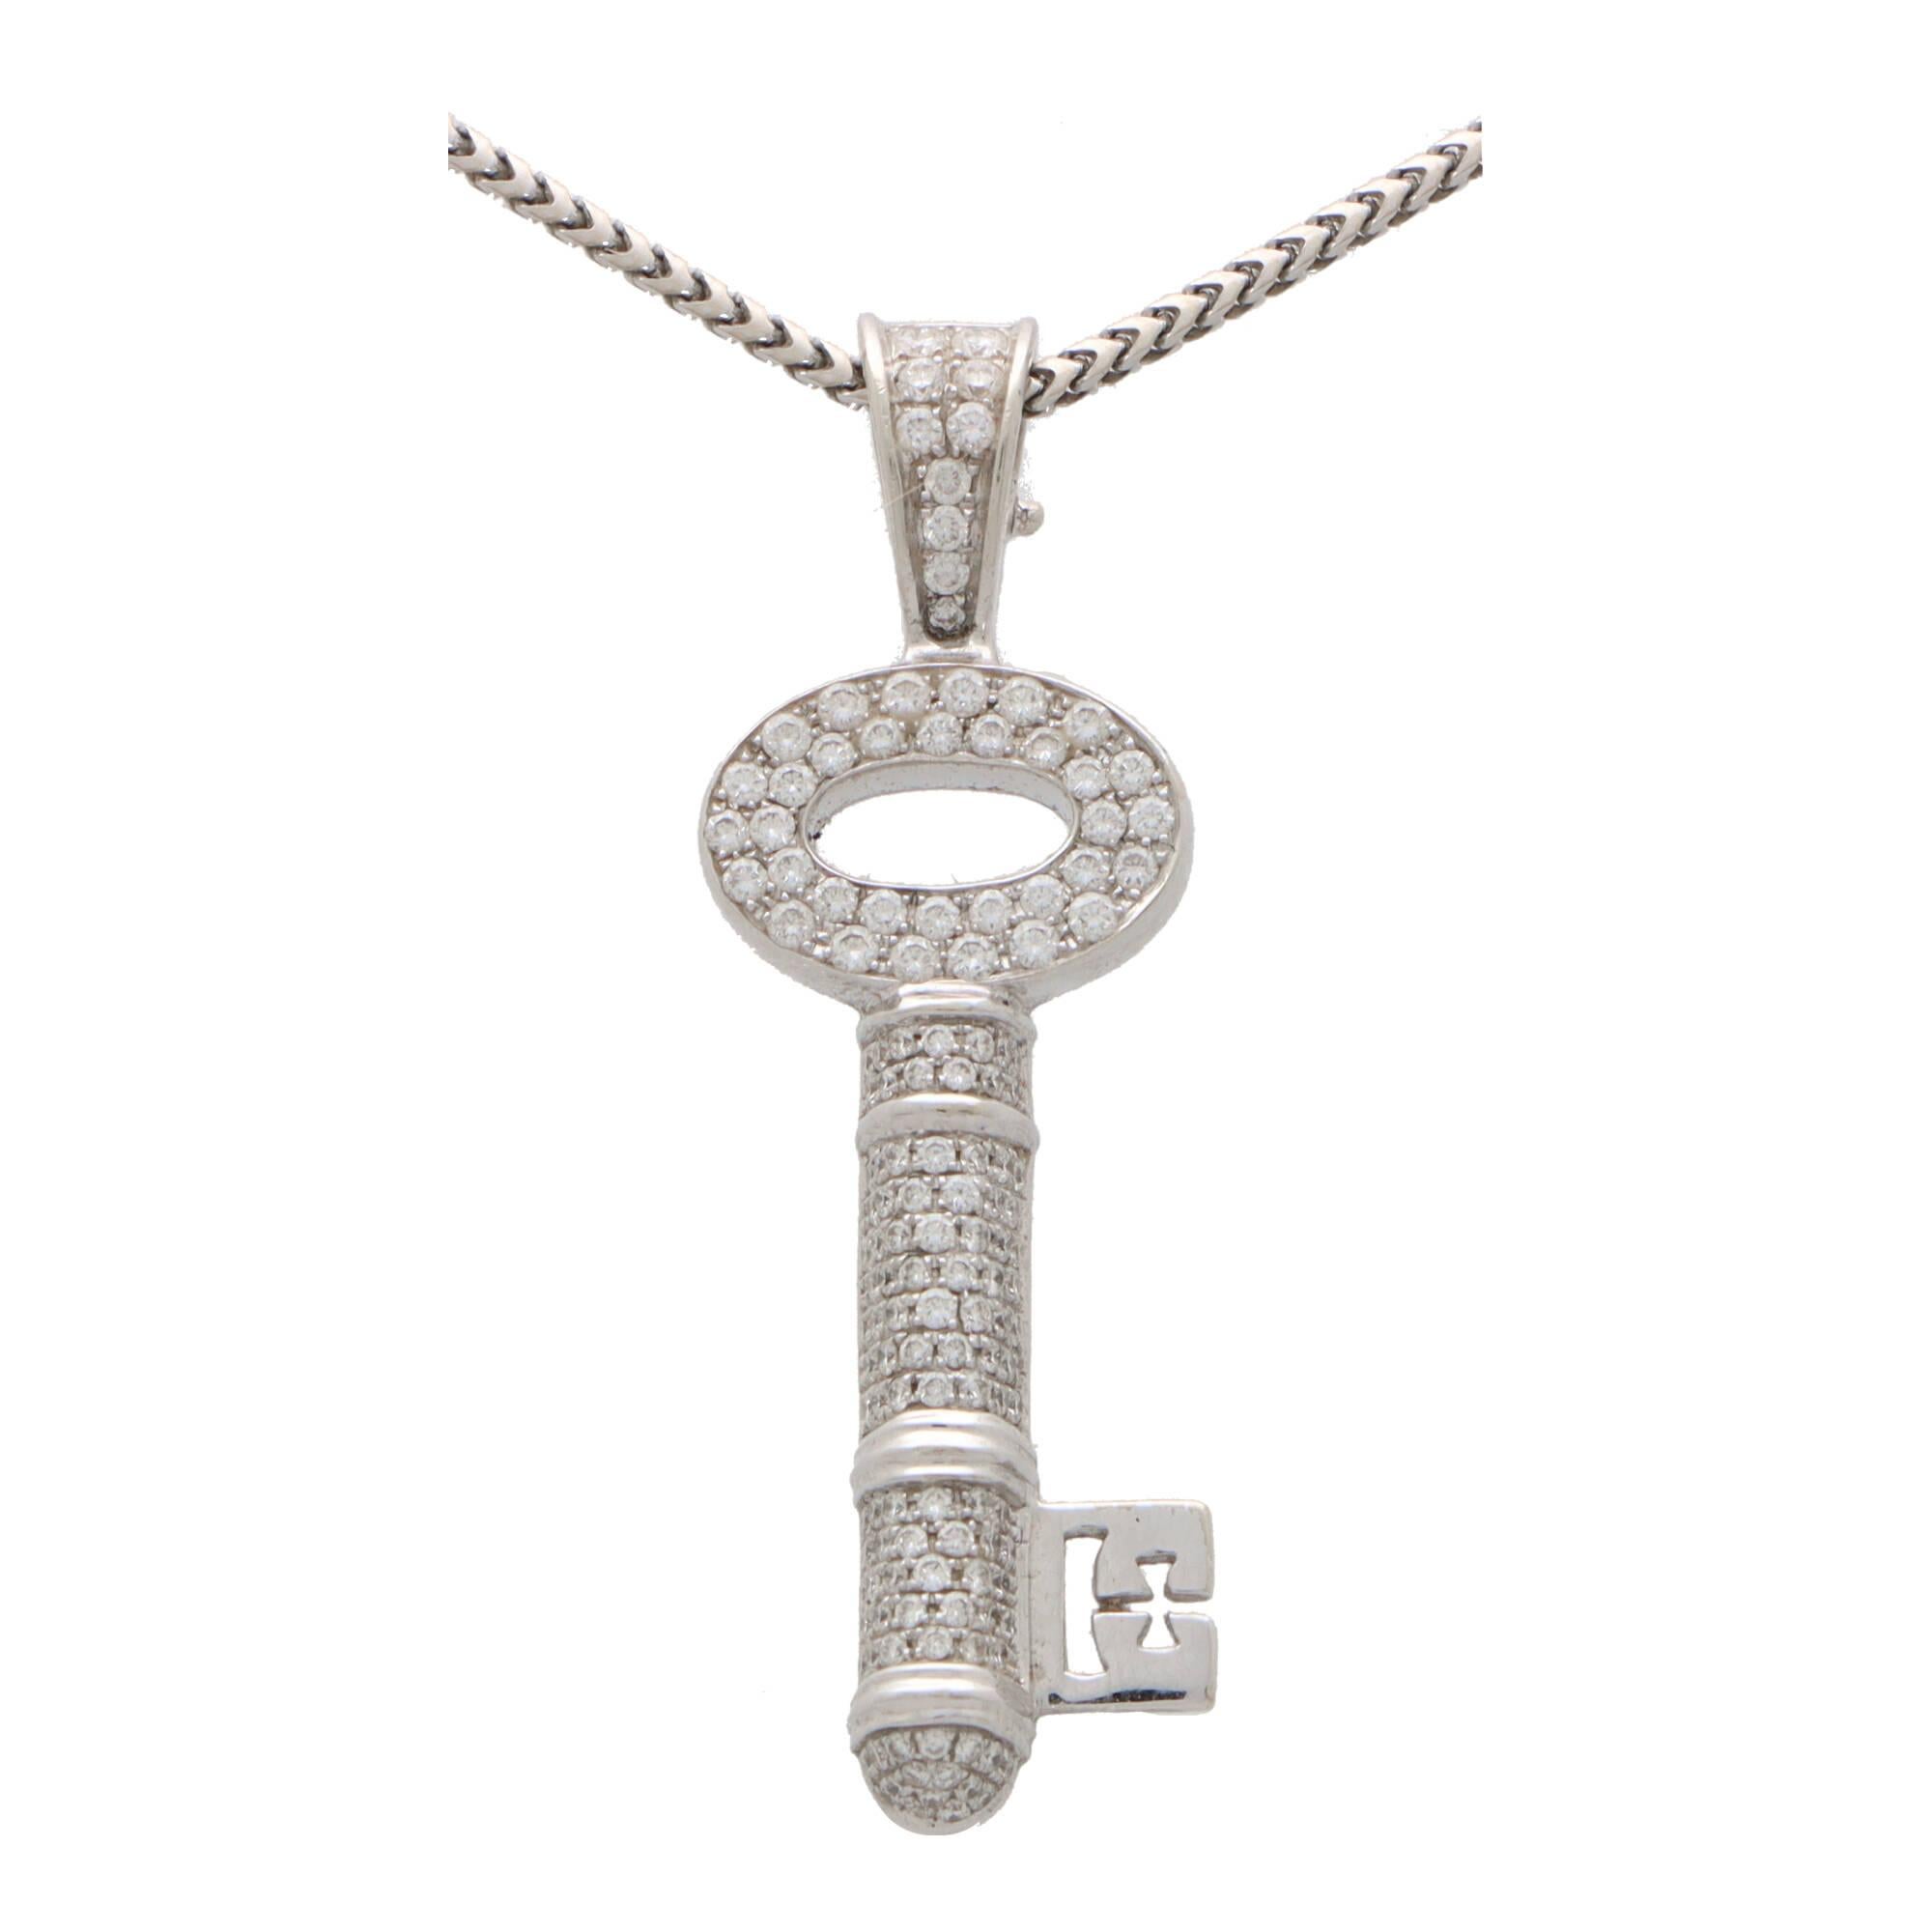 A beautiful vintage Theo Fennell diamond key pendant necklace set in 18k white gold.

The pendant depicts a chunky yet elegant key motif; set with 150 round brilliant cut diamonds. These diamonds perfectly highlight the size of the white gold key